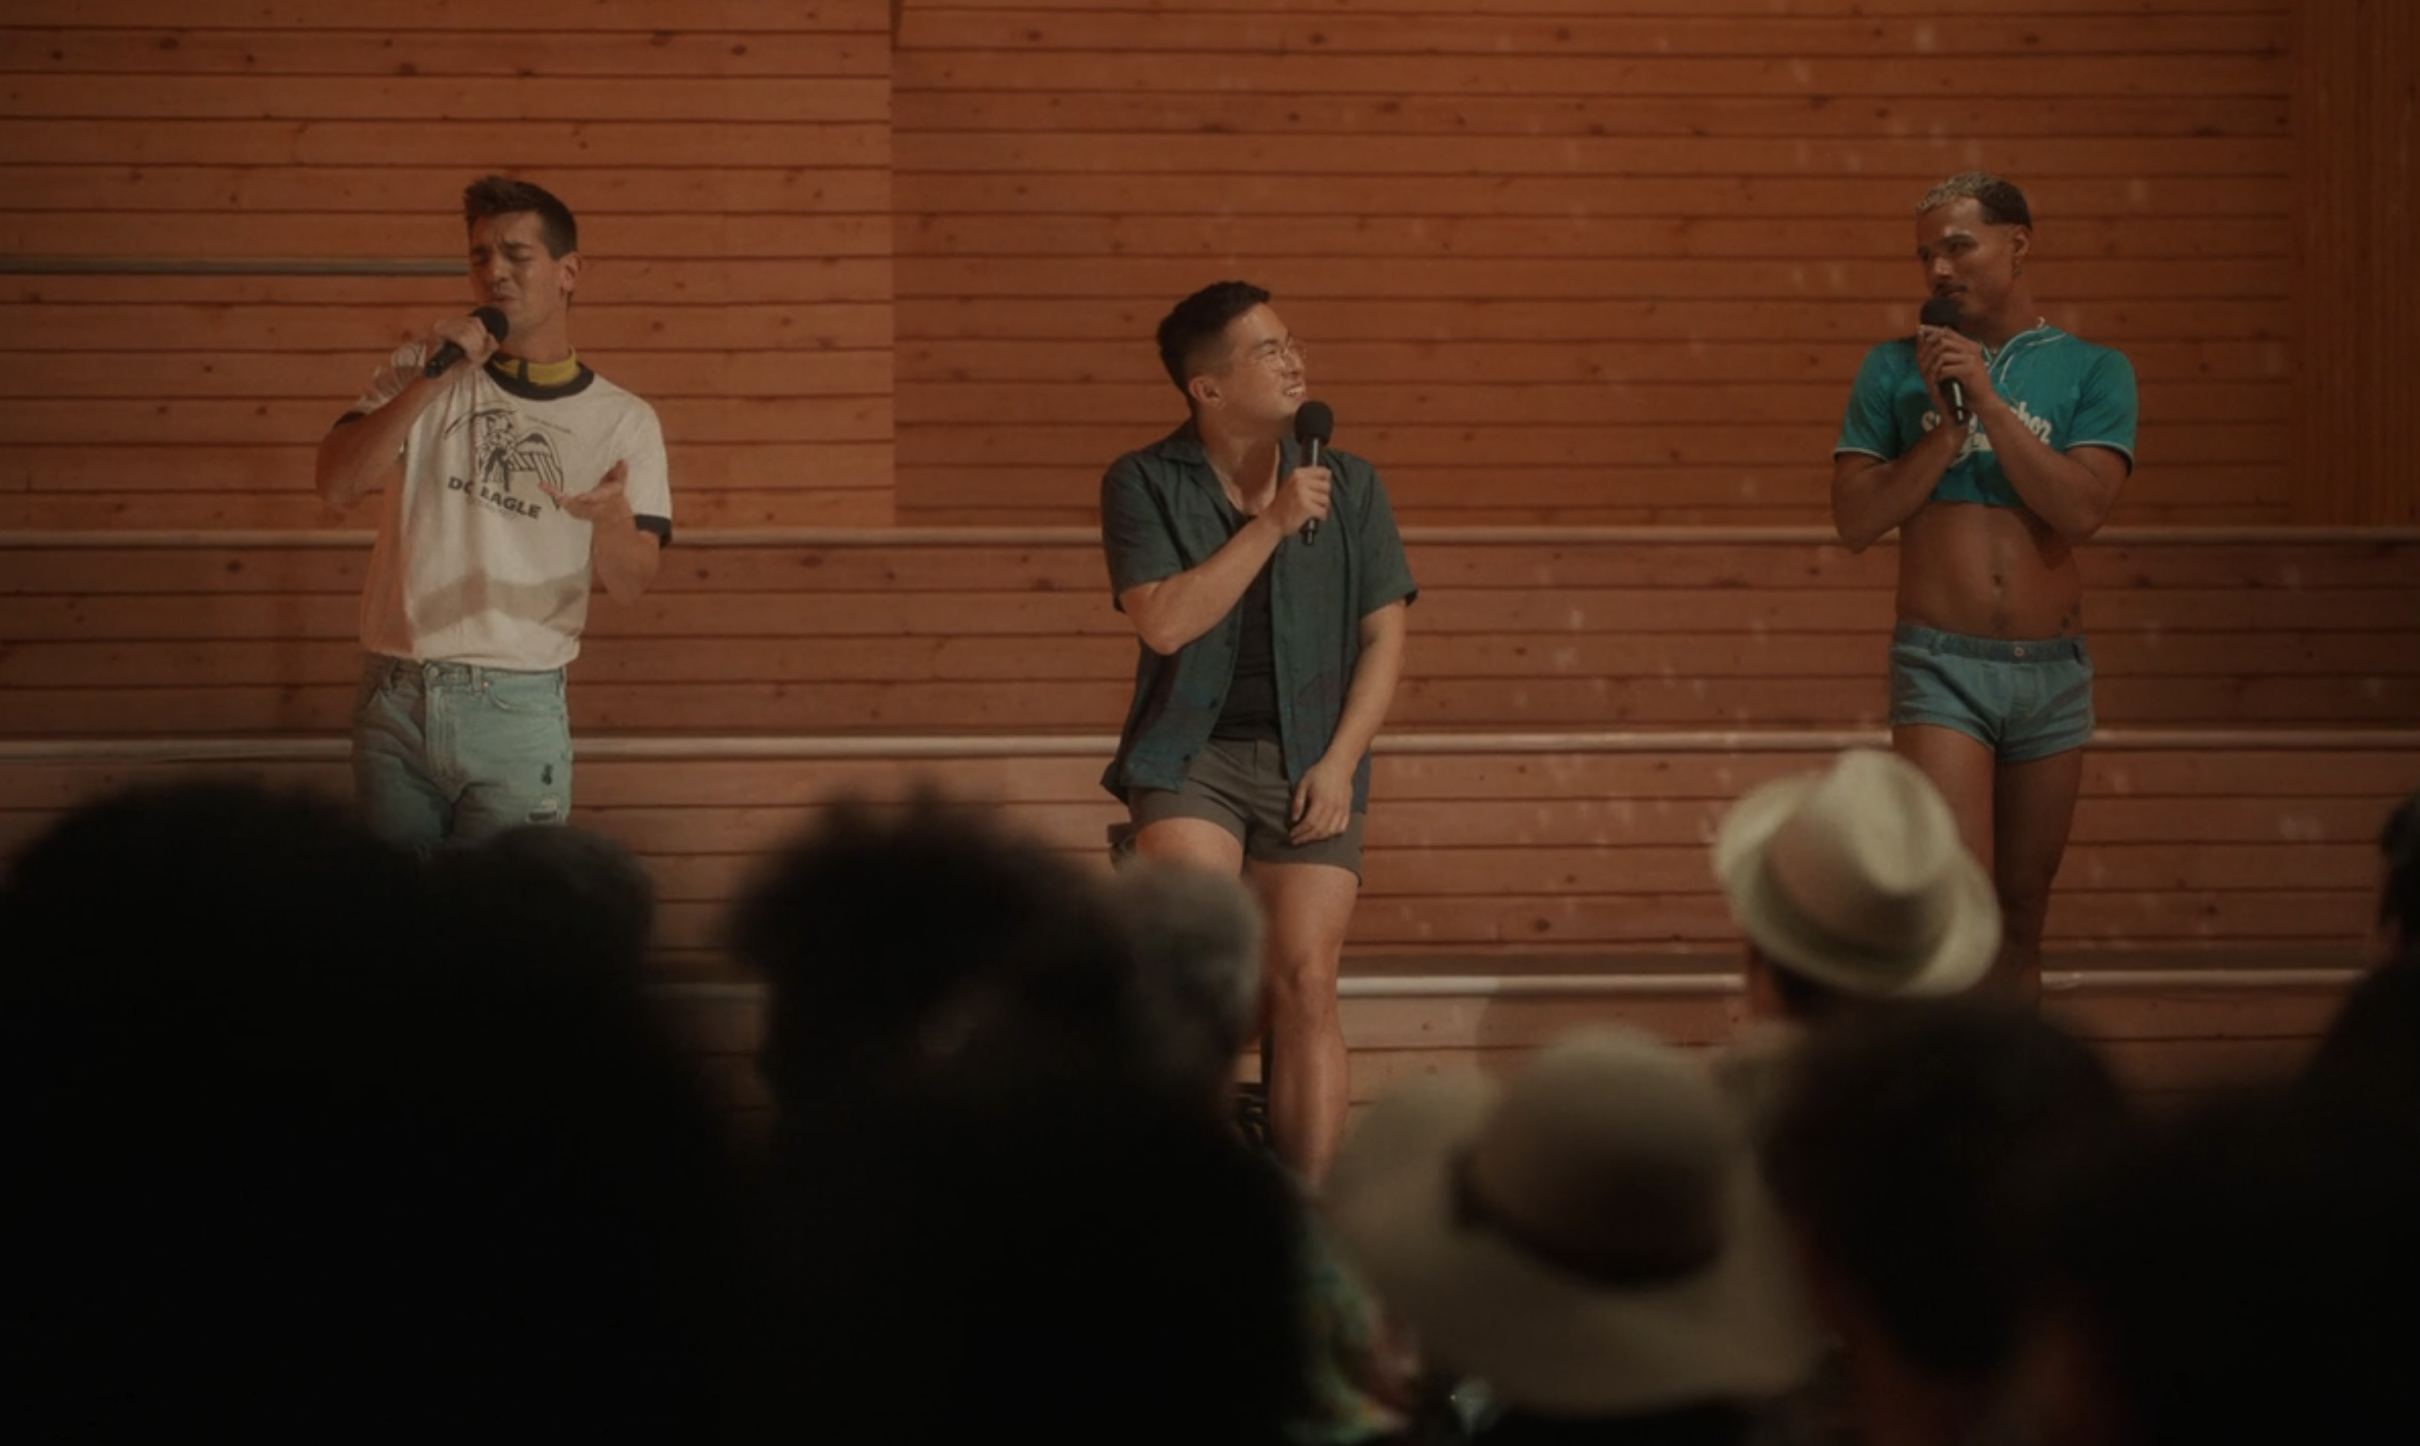 Three men, two of them wearing shorts, singing into microphones